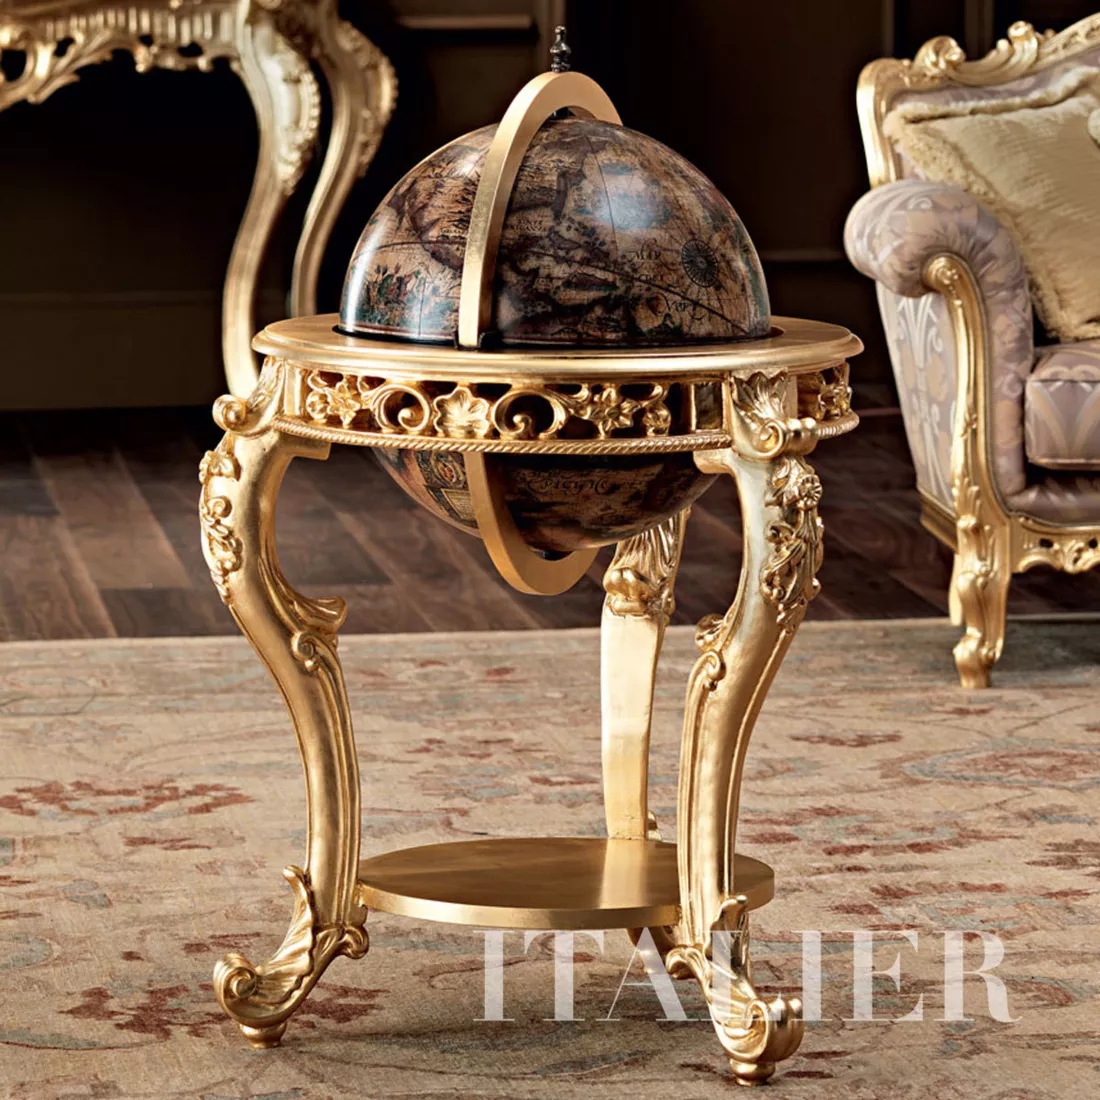 Bar-globe-with-cocktails-compartment-ready-for-party-Villa-Venezia-collection-Modenese-Gastoneujzthg